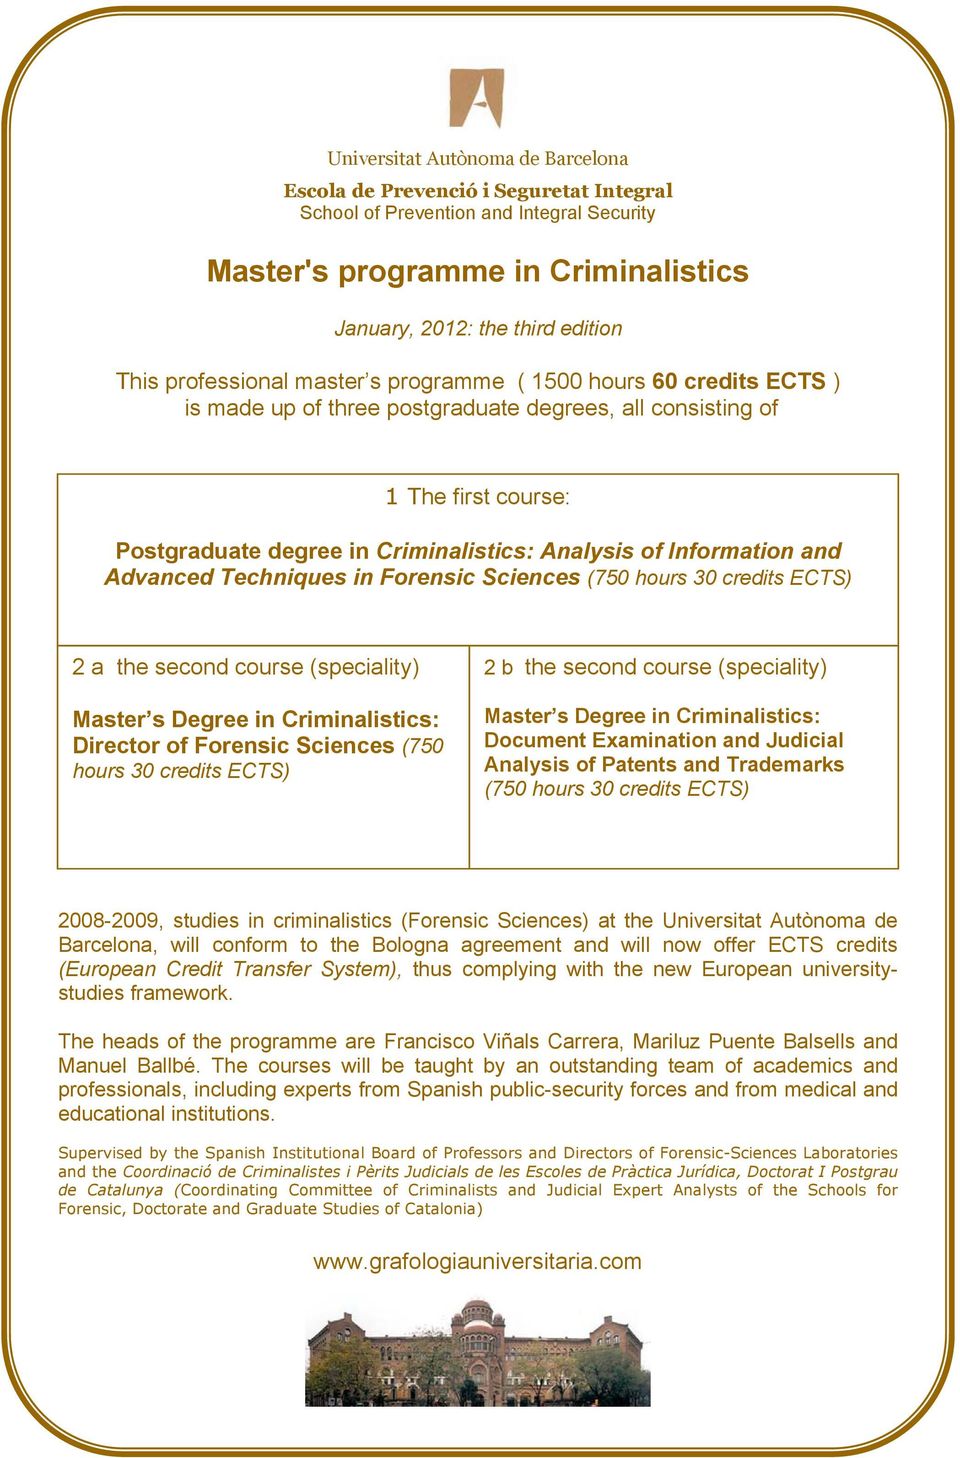 Forensic Sciences (750 hours 30 credits ECTS) 2 a the second course (speciality) Master s Degree in Criminalistics: Director of Forensic Sciences (750 hours 30 credits ECTS) 2 b the second course